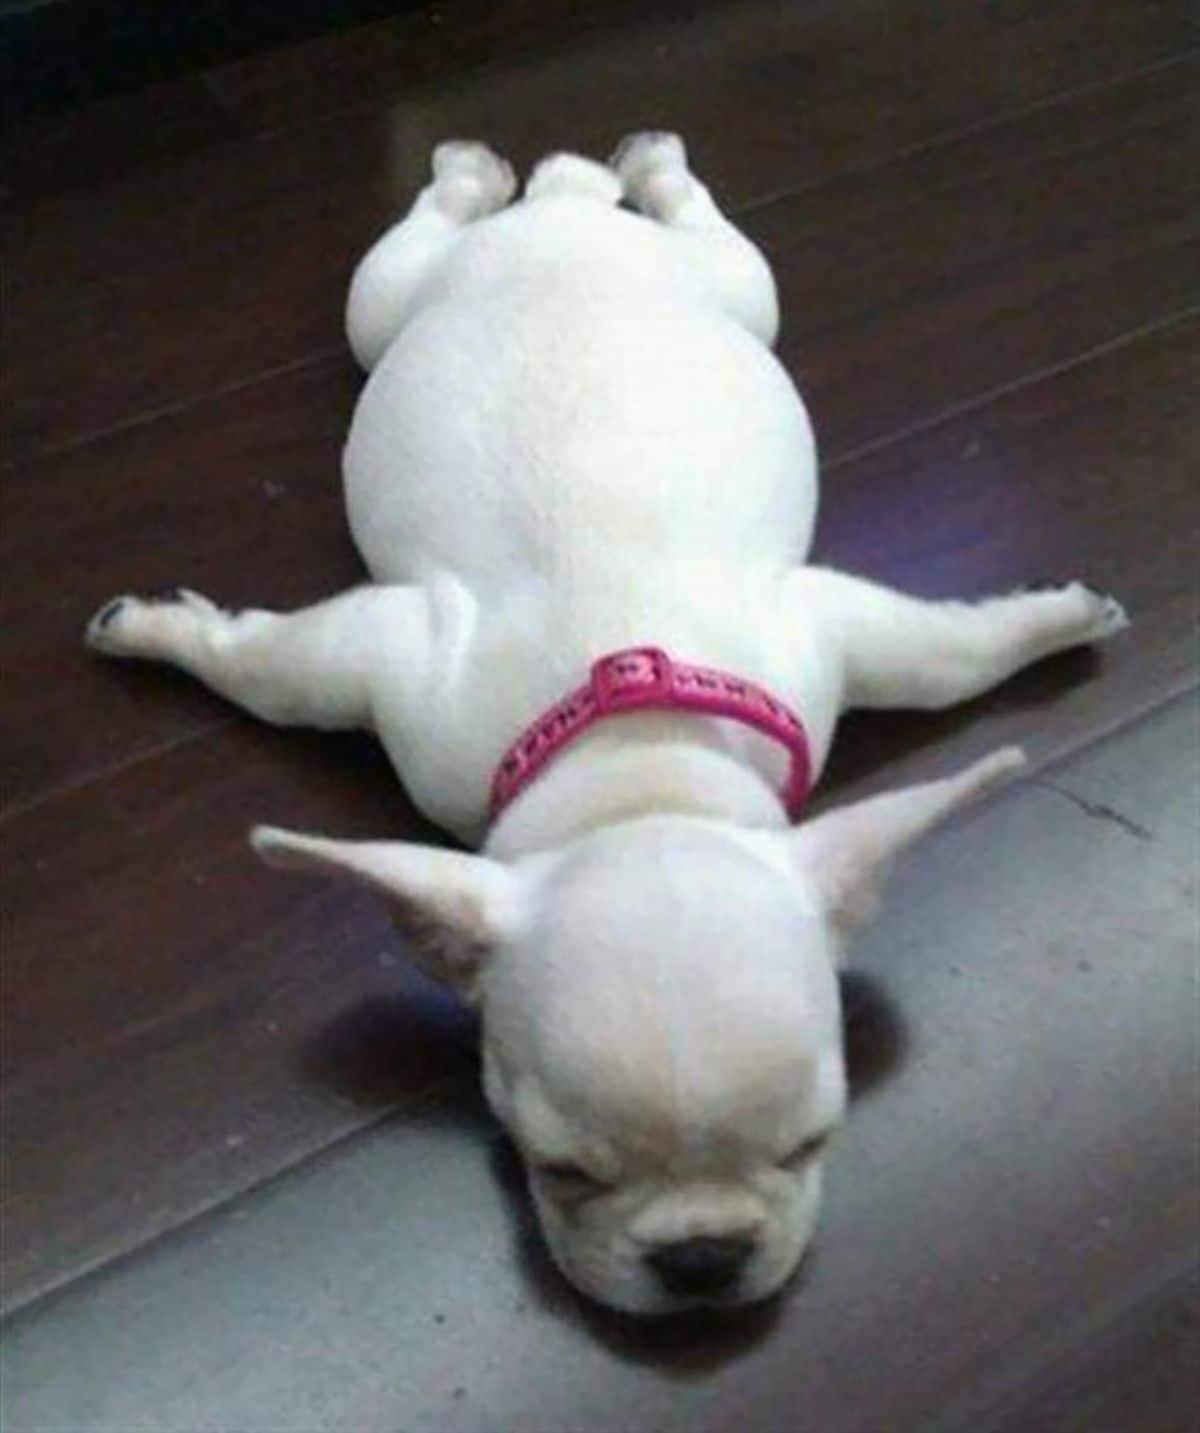 white french bulldog puppy sleeping flat on the floor with the limbs stretched out